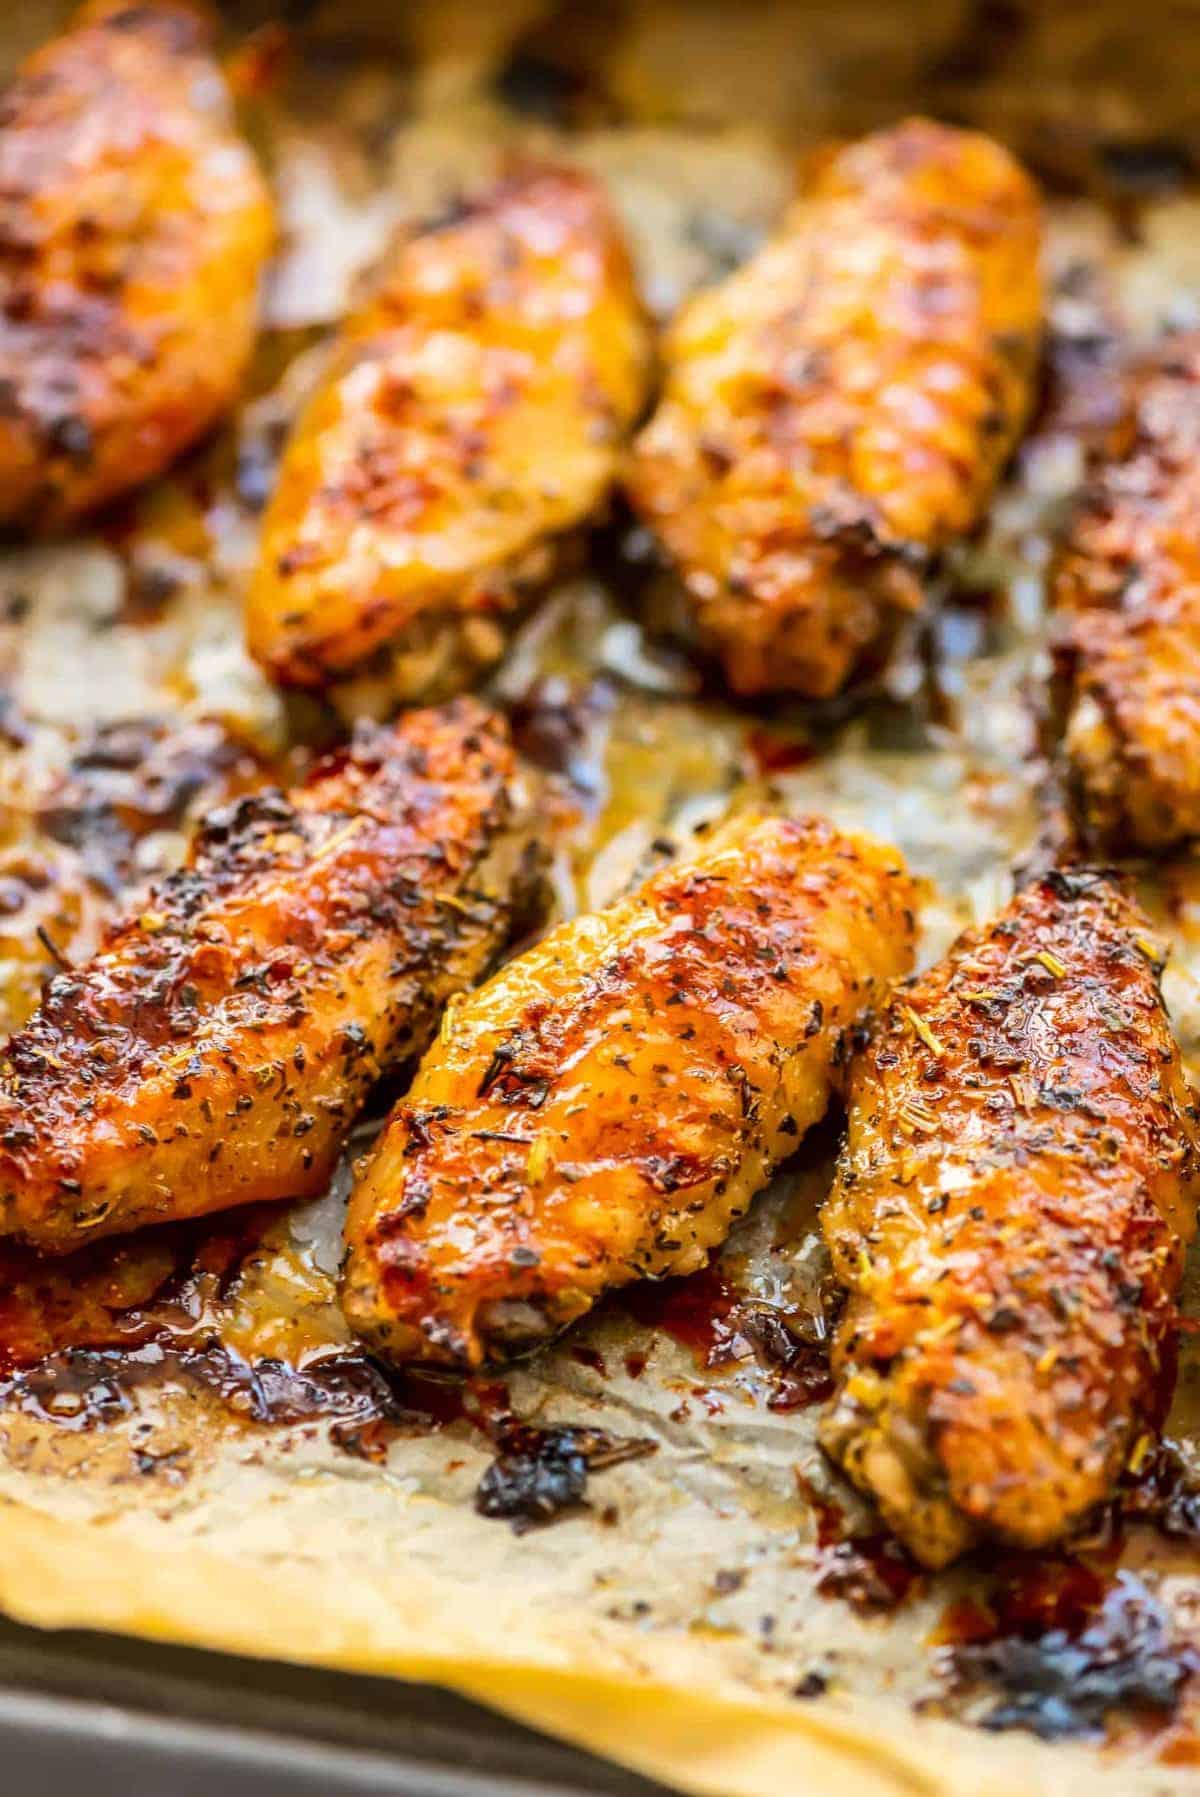 Garlic And Herb Baked Chicken Wings Easy Chicken Recipes Video,How Long To Cook 1 Inch Pork Chops On A Gas Grill